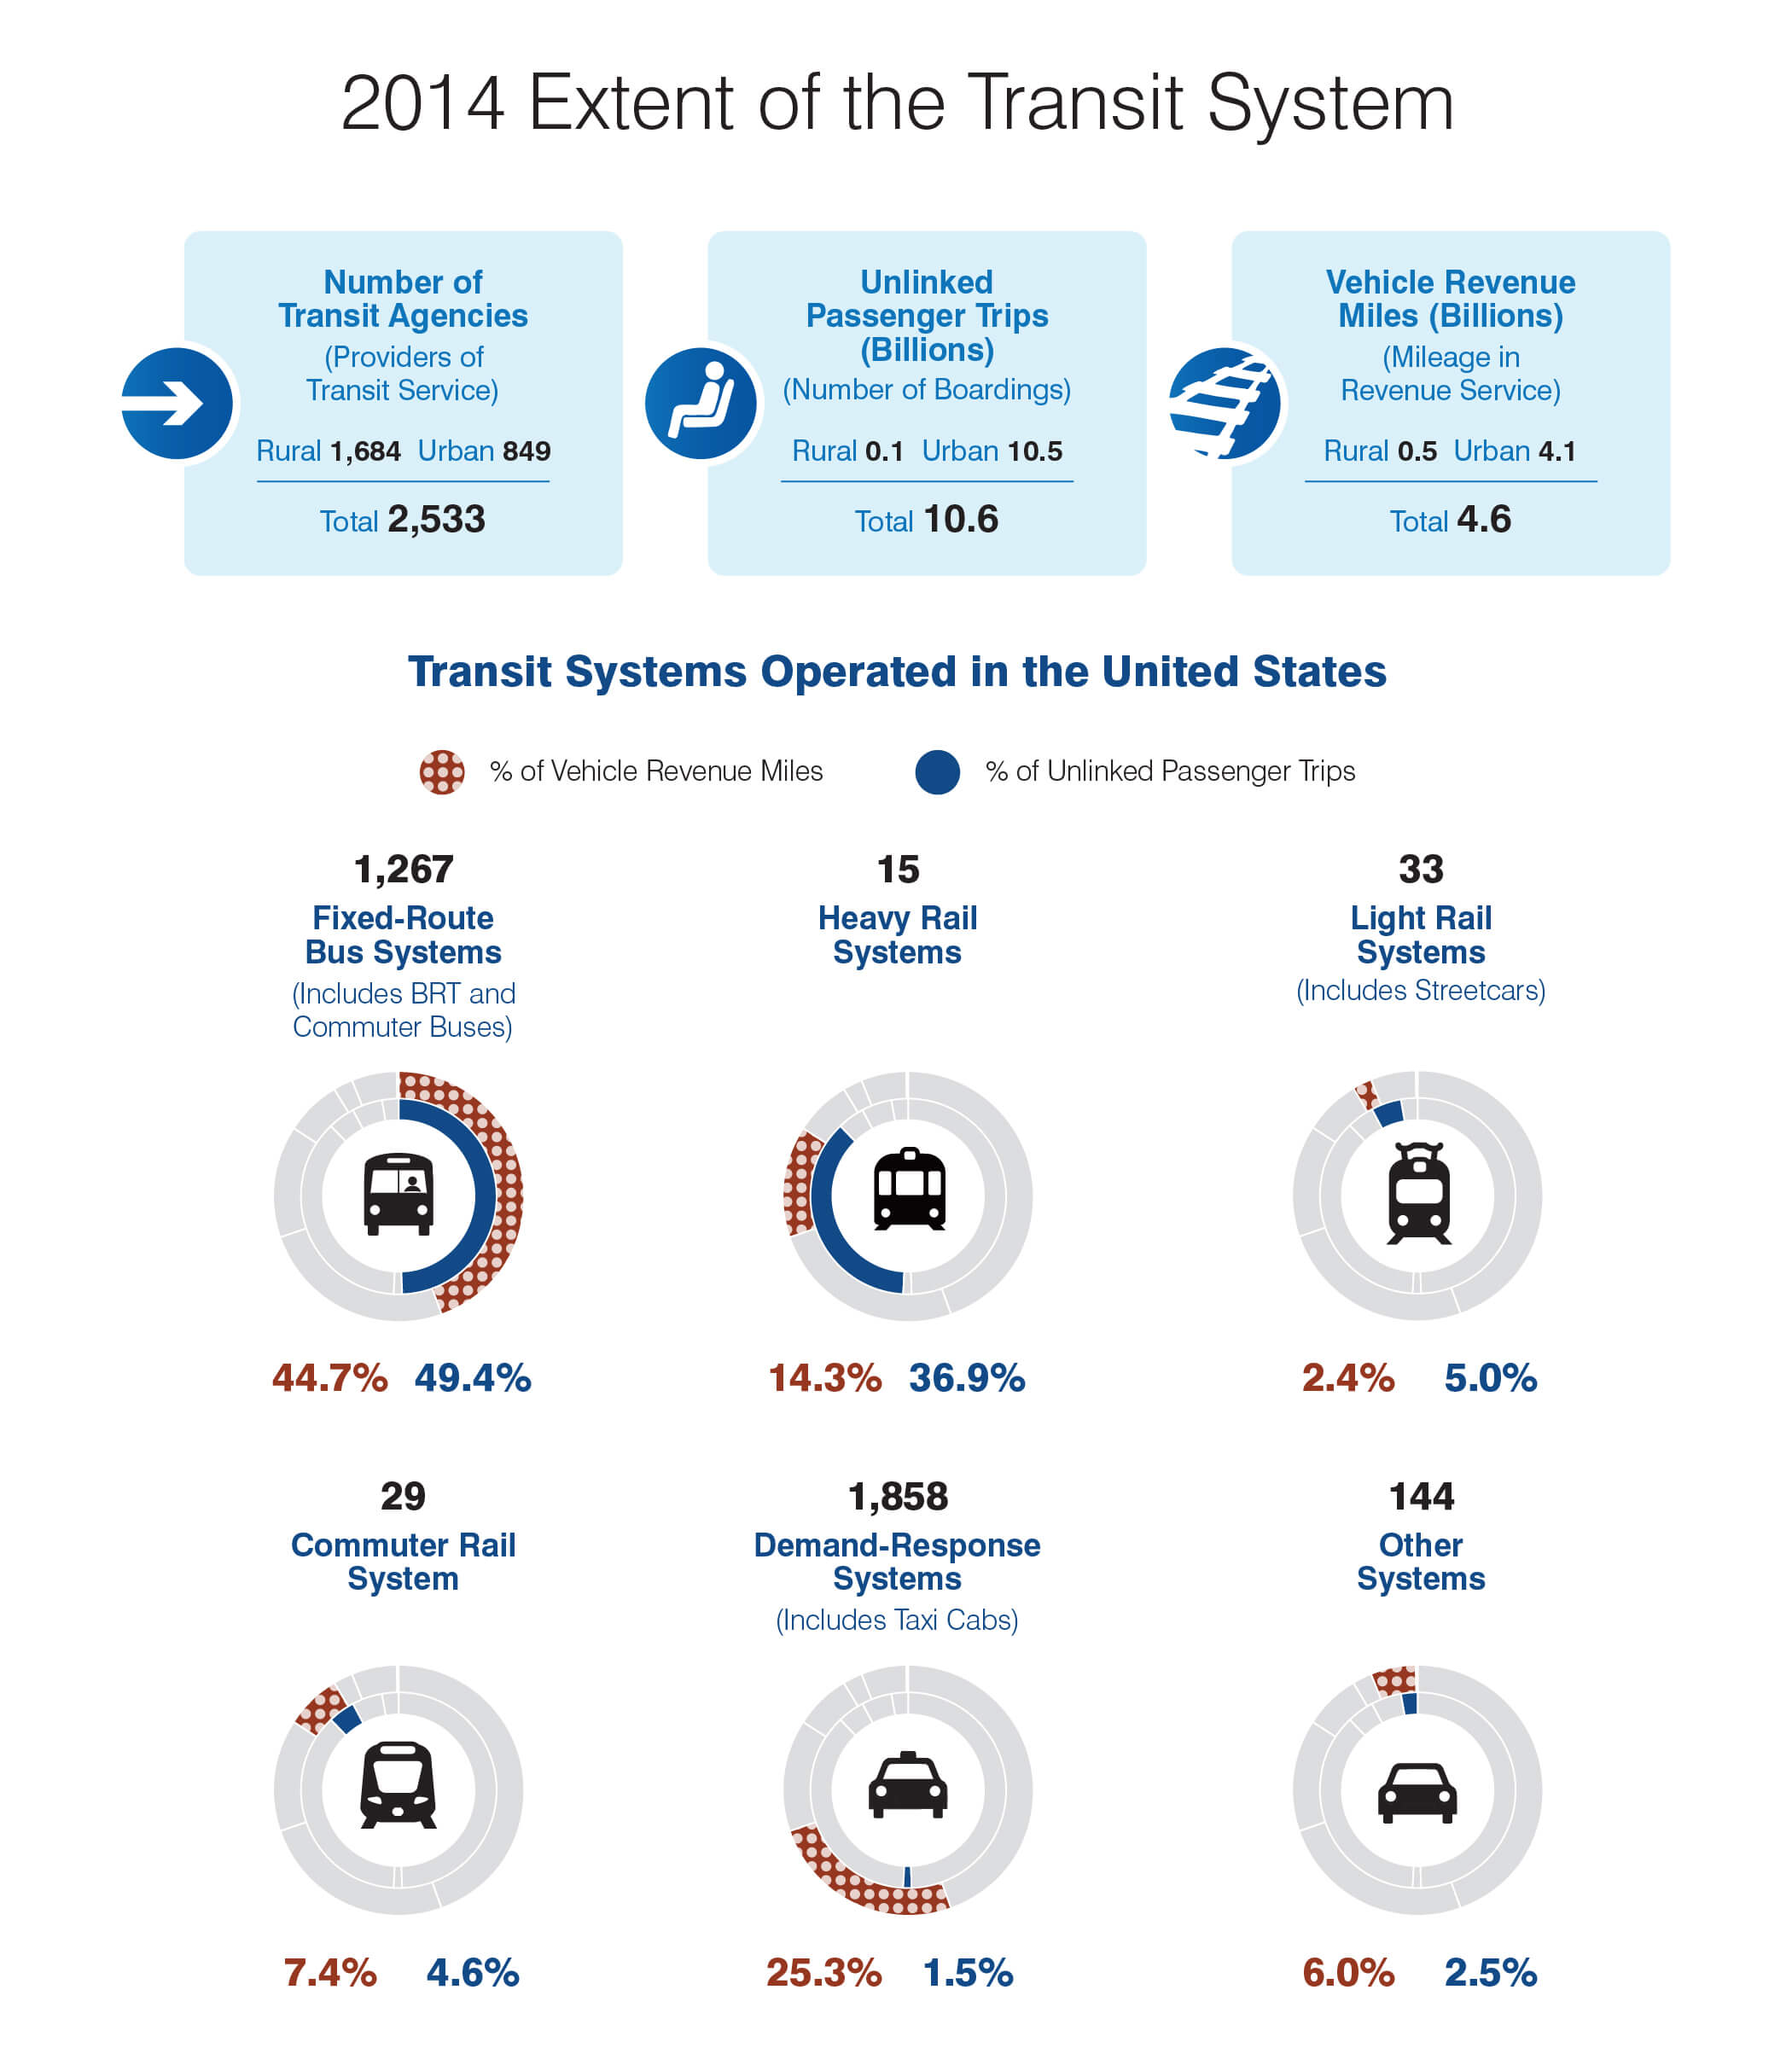 2004-2014 Transit Trends. This exhibit illustrates transit trends in urban areas from 2004 to 2014. All levels of government spent a combined $65.1 billion in 2014 to provide public transportation and maintain transit infrastructure, with $47.6 billion spent for the operating expenses. Of this, 35.5 percent was system-generated revenue, 8.6 percent was federal funding, 25.4 percent was state sources, and 30.4 percent was local sources. Public transit agencies spent $17.5 billion on capital investments in 2014. Federal funding (including Recovery Funds) of capital investments comprised 42.0 percent of total 2014 spending, while 13.7 percent was state sources and 44.6 percent was local sources. Total annual route miles increased 11.4 percent from 225,383 in 2004 to 251,121 in 2014. Average annual route miles traveled by bus increased by 10.6 percent, average annual route miles traveled by heavy rail increased by 2.0 percent, average annual route miles traveled by commuter rail increased by 27.2 percent, and average annual route miles traveled by light rail increased by 113.1 percent. The annual number of transit fatalities, including suicide and commuter rail fatalities, increased by 30.0 percent from 2004 to 2014, rising from 247 fatalities to 321 fatalities. Average operating cost per vehicle mile for the top 10 agencies increased by 23.2 percent from 2004 to 2014, rising from $12.9 to $15.9 in constant dollars; nationwide, the average operating cost per vehicle mile increased by 9.7 percent (from $9.2 to $10.1 in constant dollars) from 2004 to 2014. Average recovery ratios for the top 10 agencies decreased by 3.5 percent, from a 33.9 average recovery ratio in 2004 to a 32.7 average recovery ratio in 2014; nationwide average recovery ratios for the top 10 agencies increased 2.6 percent, from a 35.2 average recovery ratio in 2004 to a 36.1 recovery ratio in 2014.